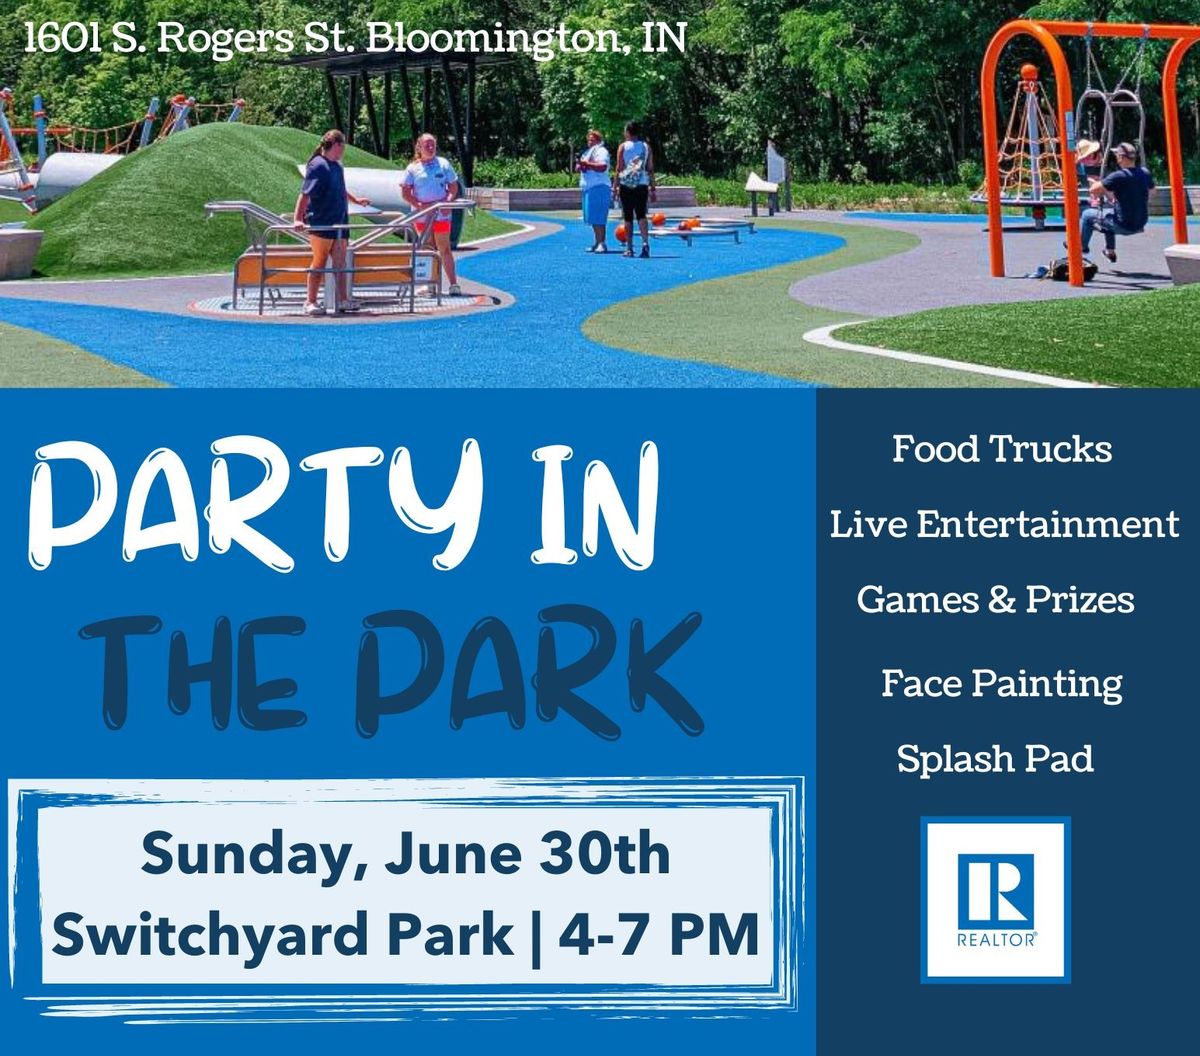 Party in the Park: A REALTOR\u00ae Client Appreciation Event